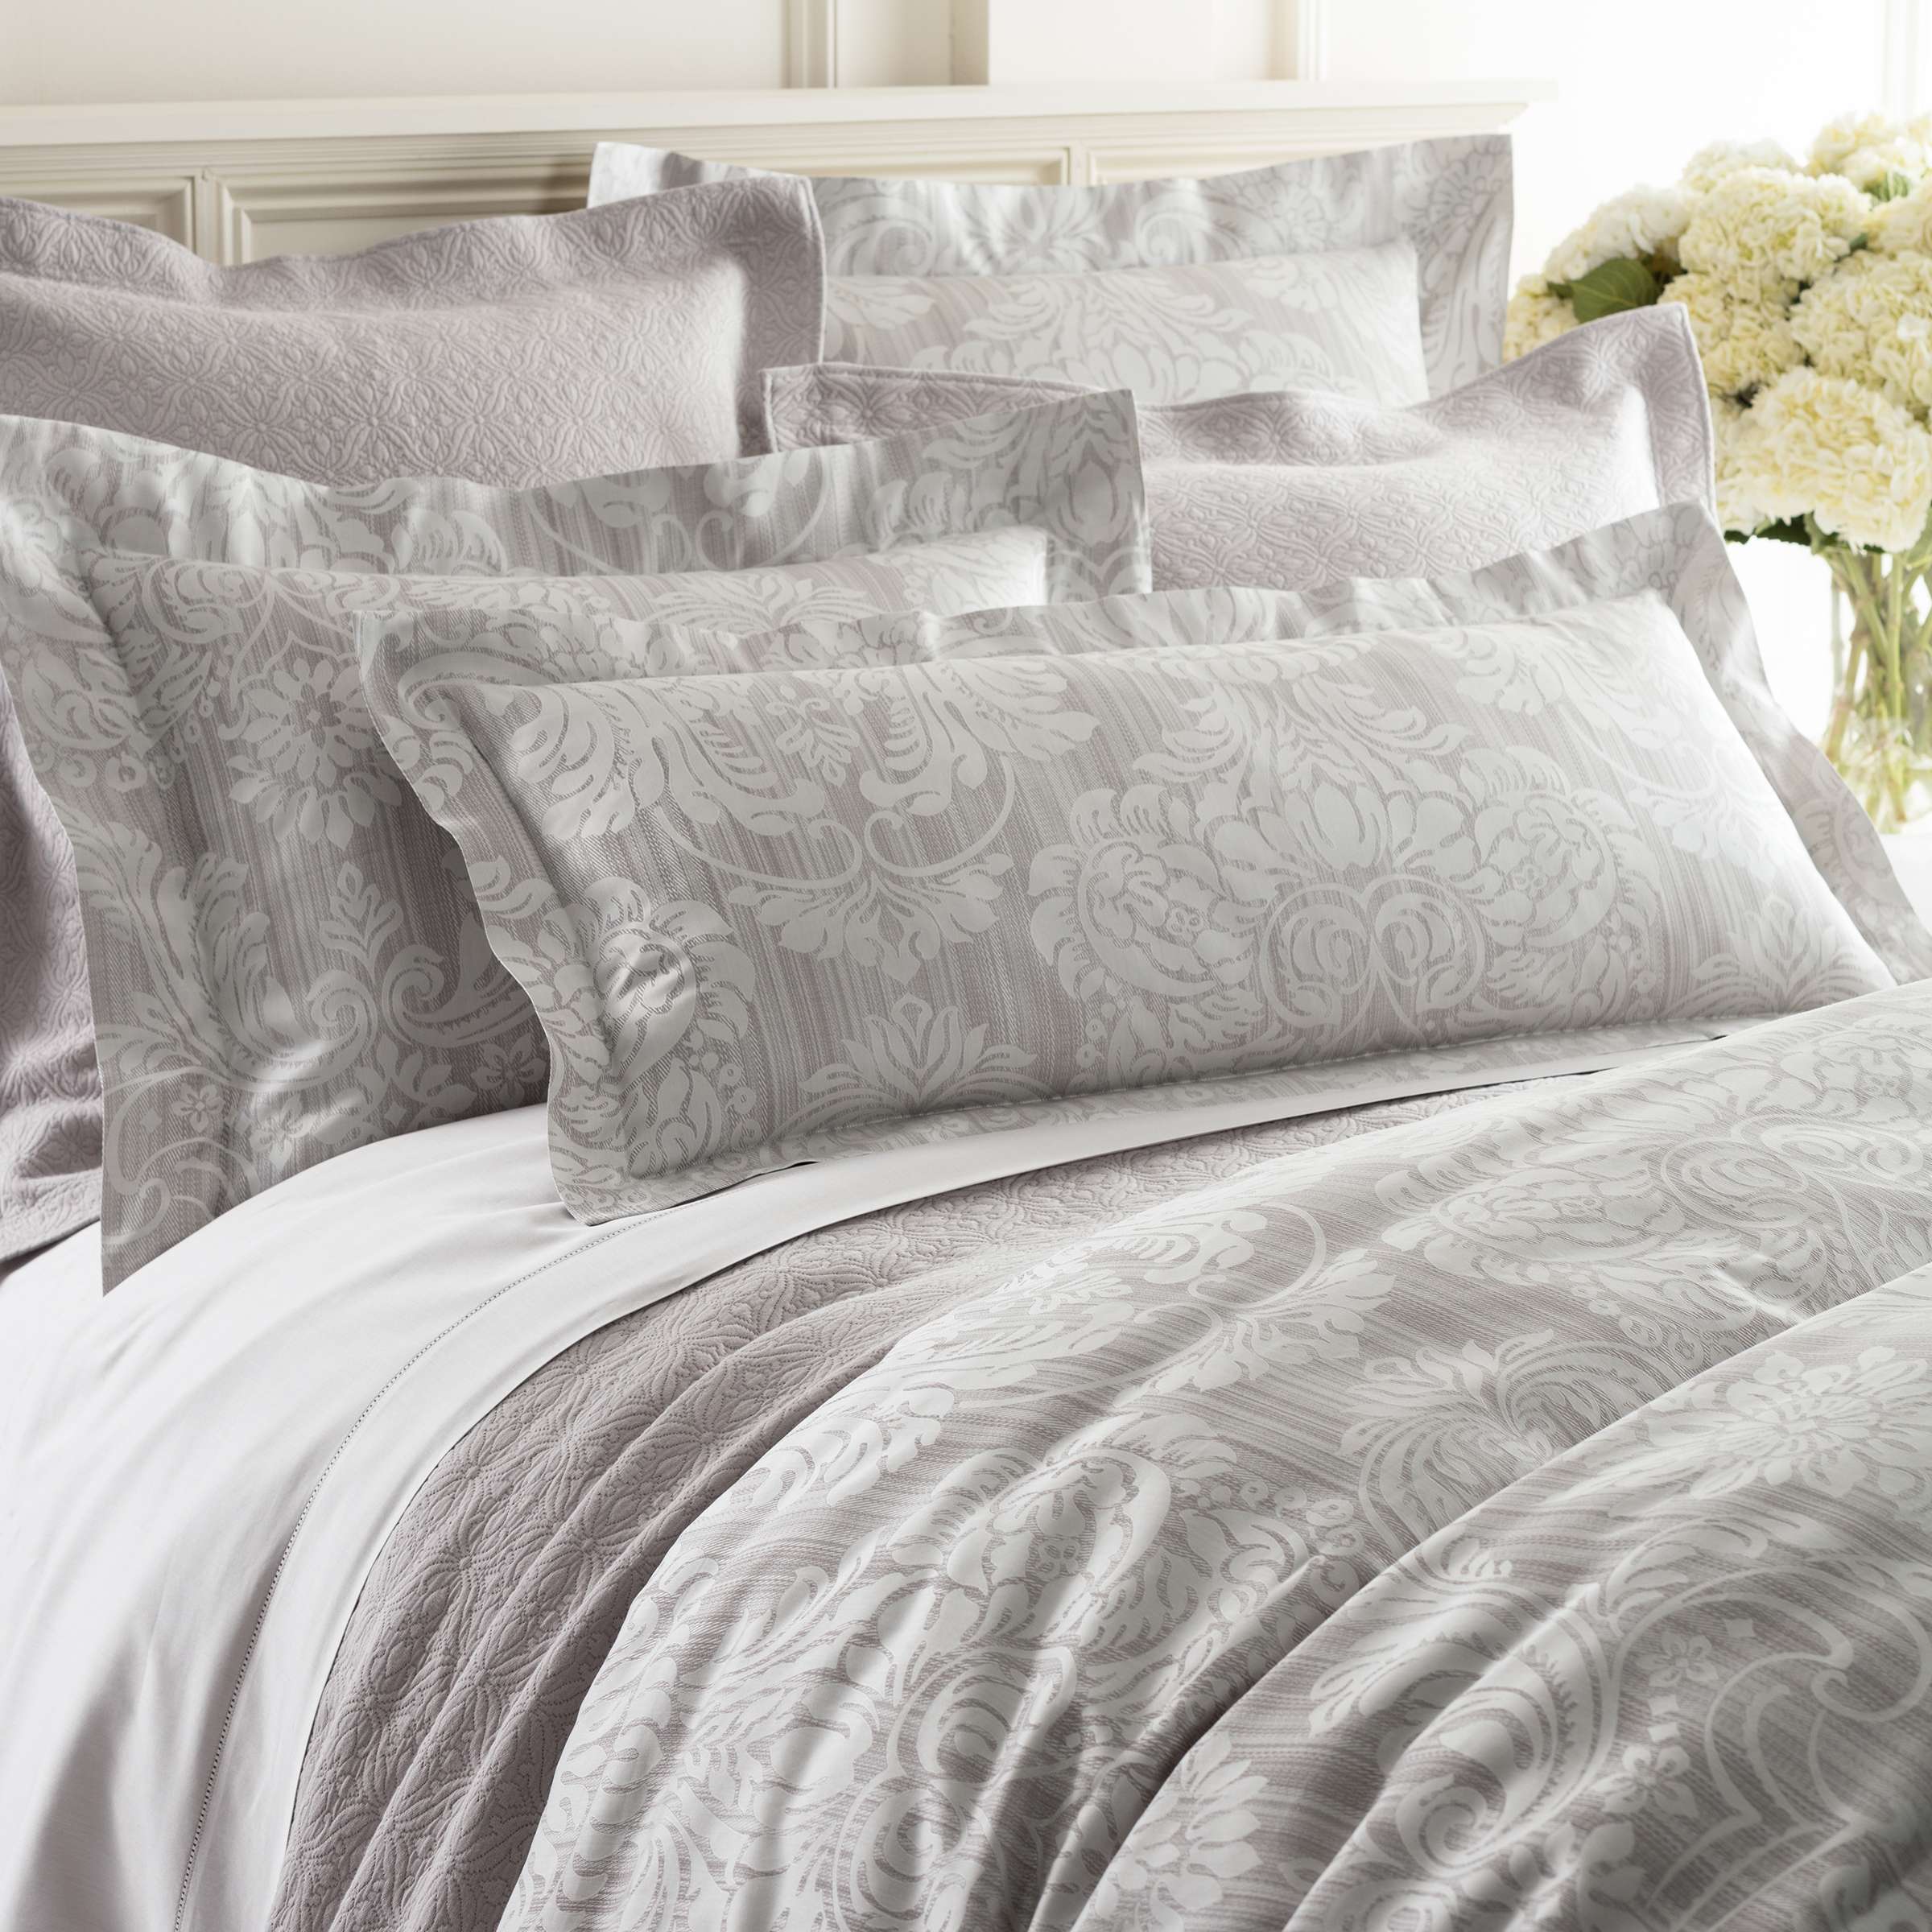 Damask King Sale Bedding And Duvet Covers Annie Selke Outlet